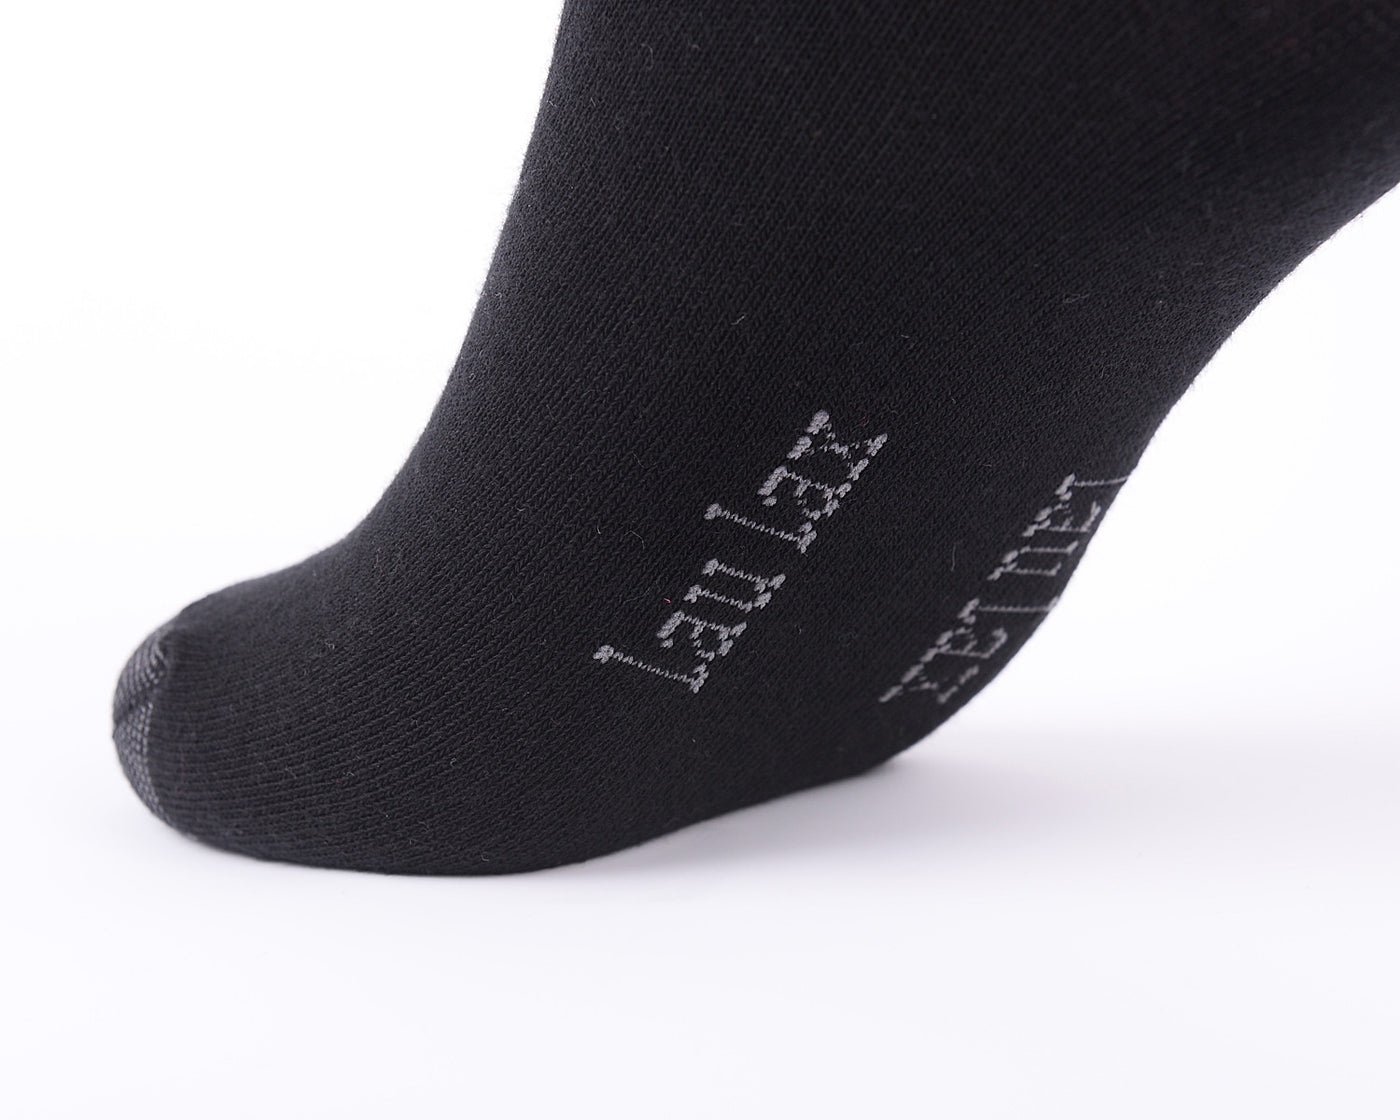 6 Pairs Smooth Seamless Toe Finest Combed Cotton Black Socks, Gift Set